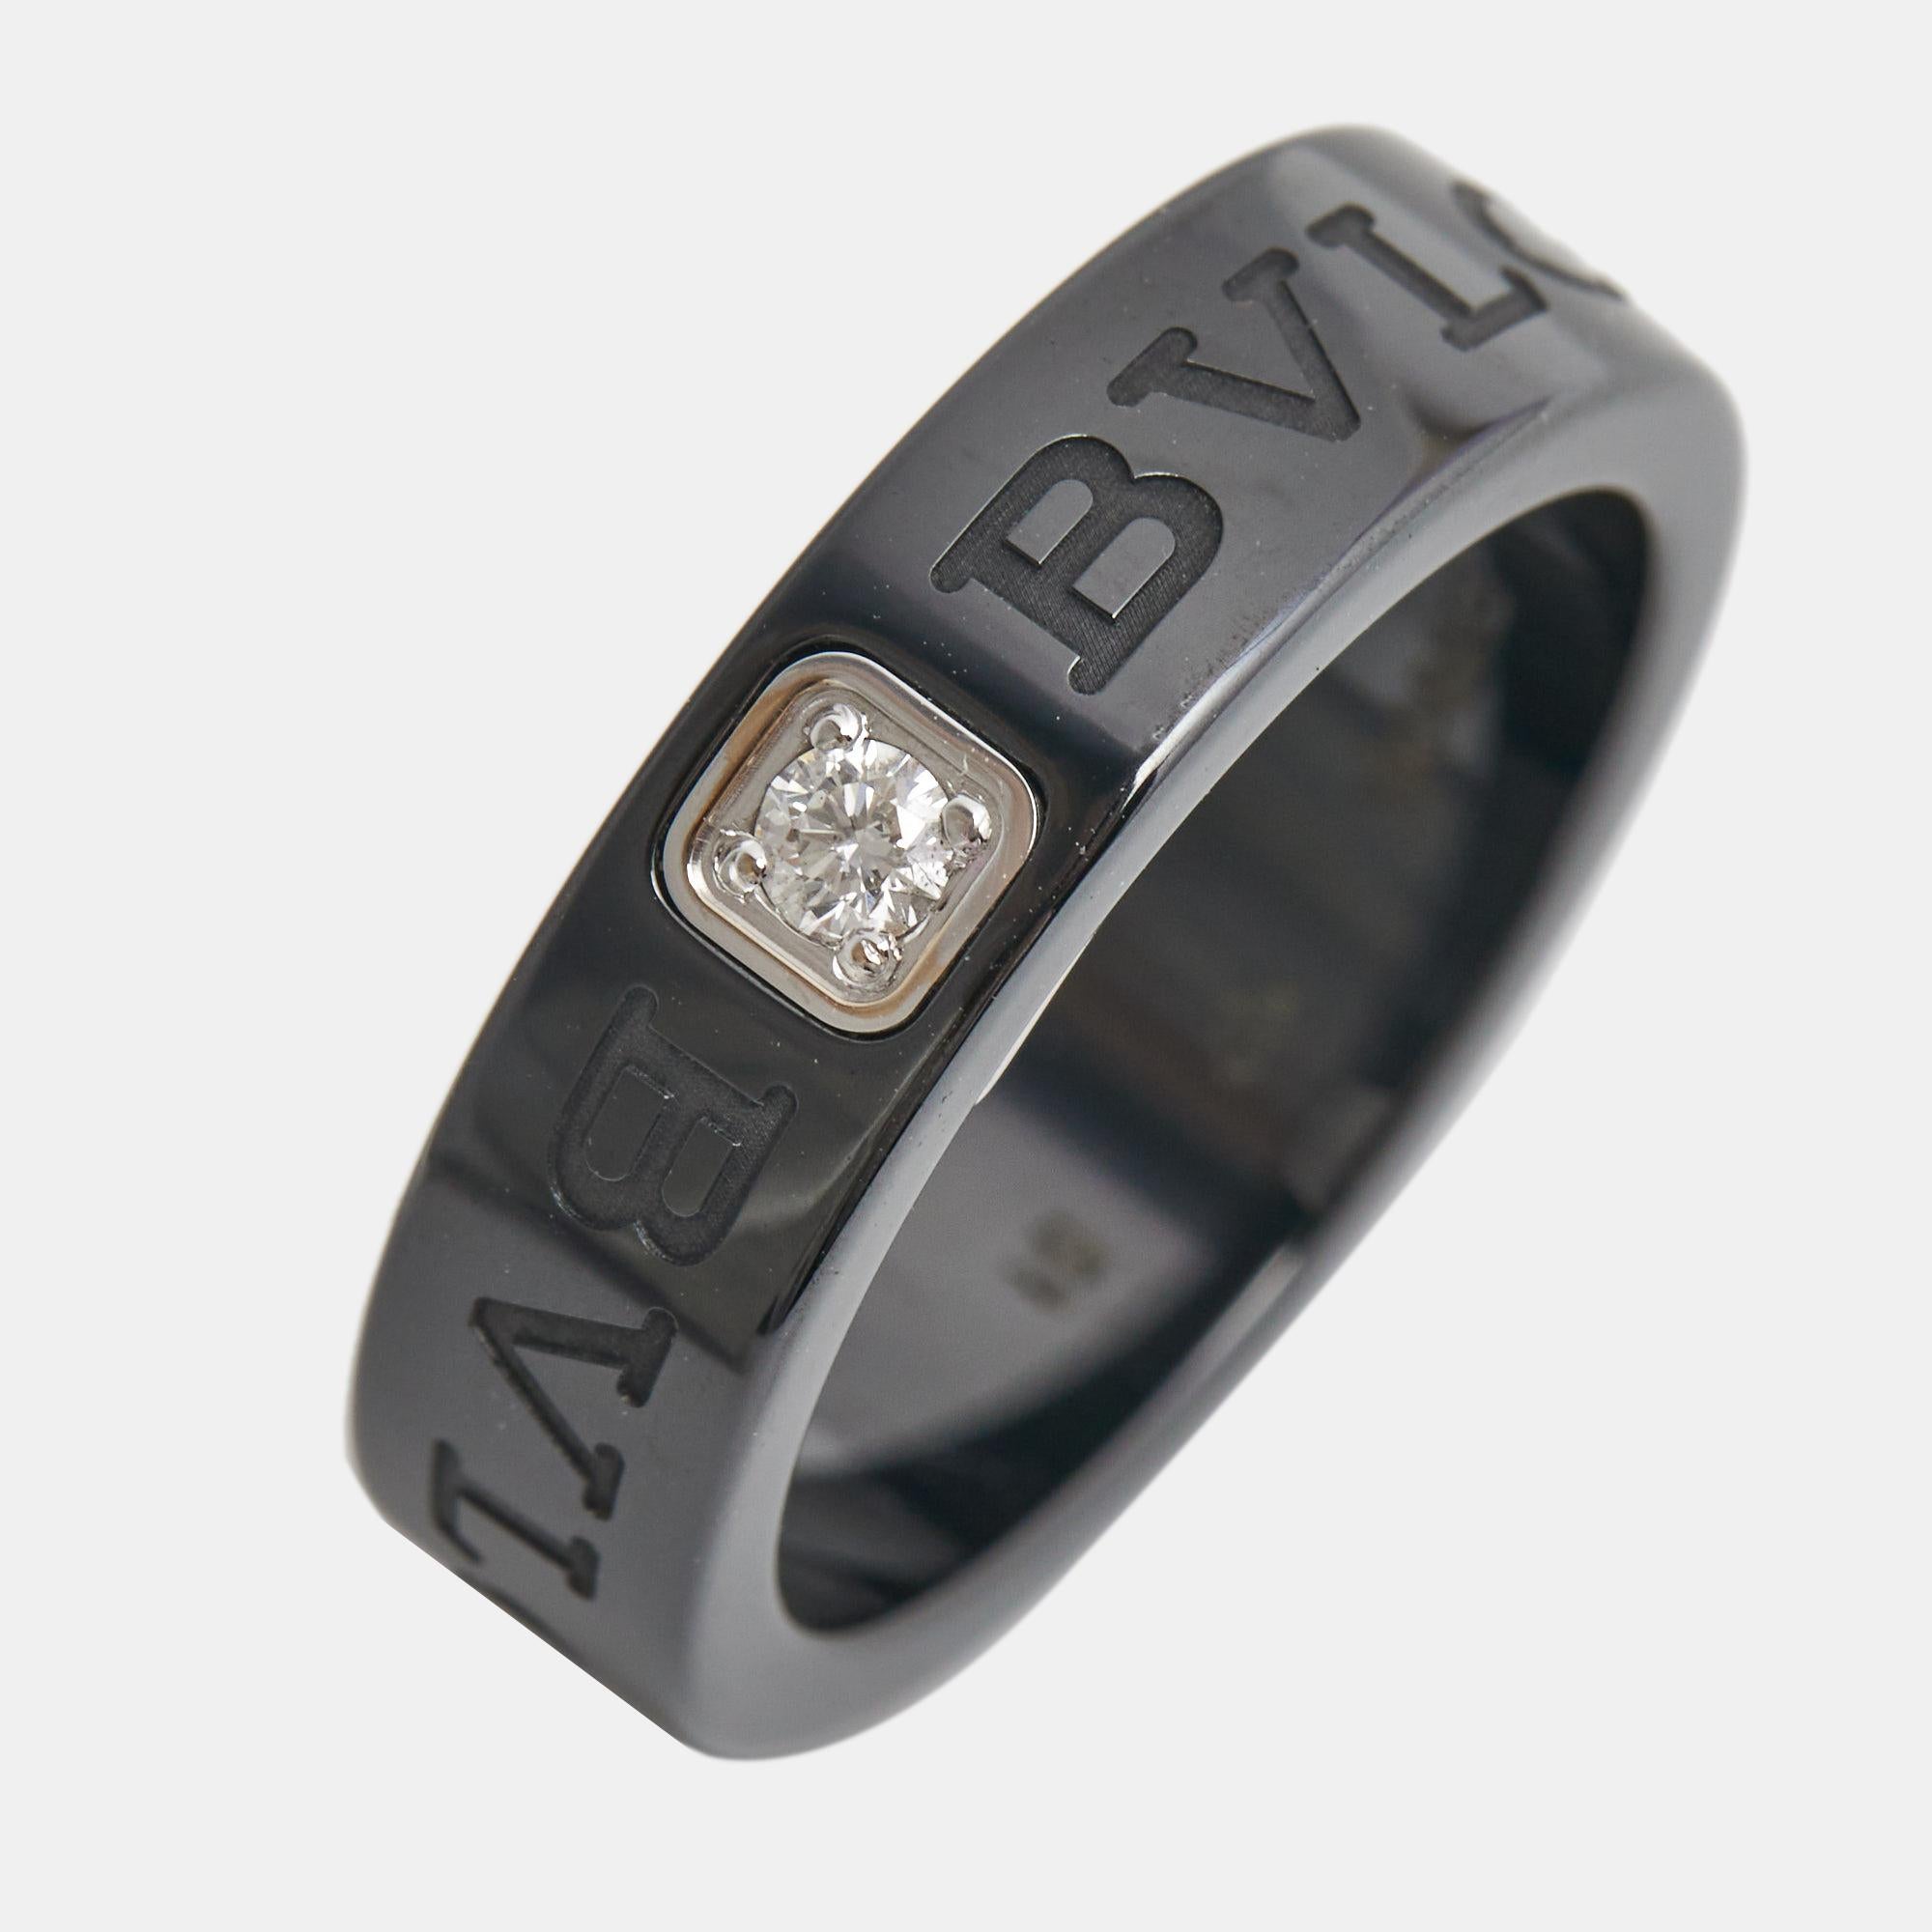 Elegant and alluring, this Bvlgari ring is sure to become a staple piece in your jewelry collection. Constructed using black ceramic, it has brand engravings and a diamond for a stunning look.

Includes: Original Box, Original Case